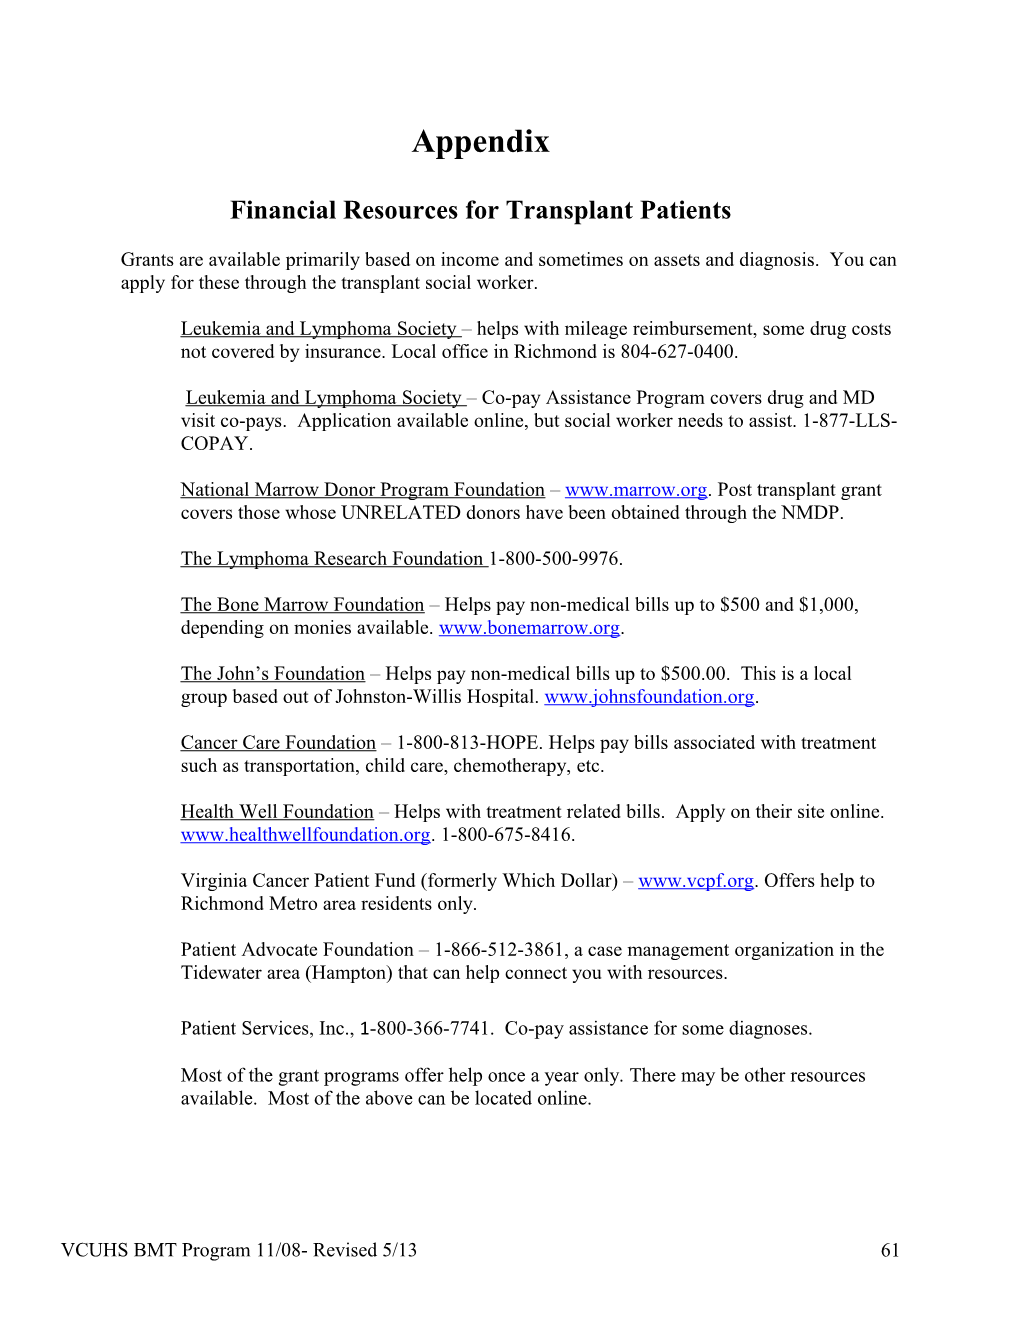 Financial Resources for Transplant Patients